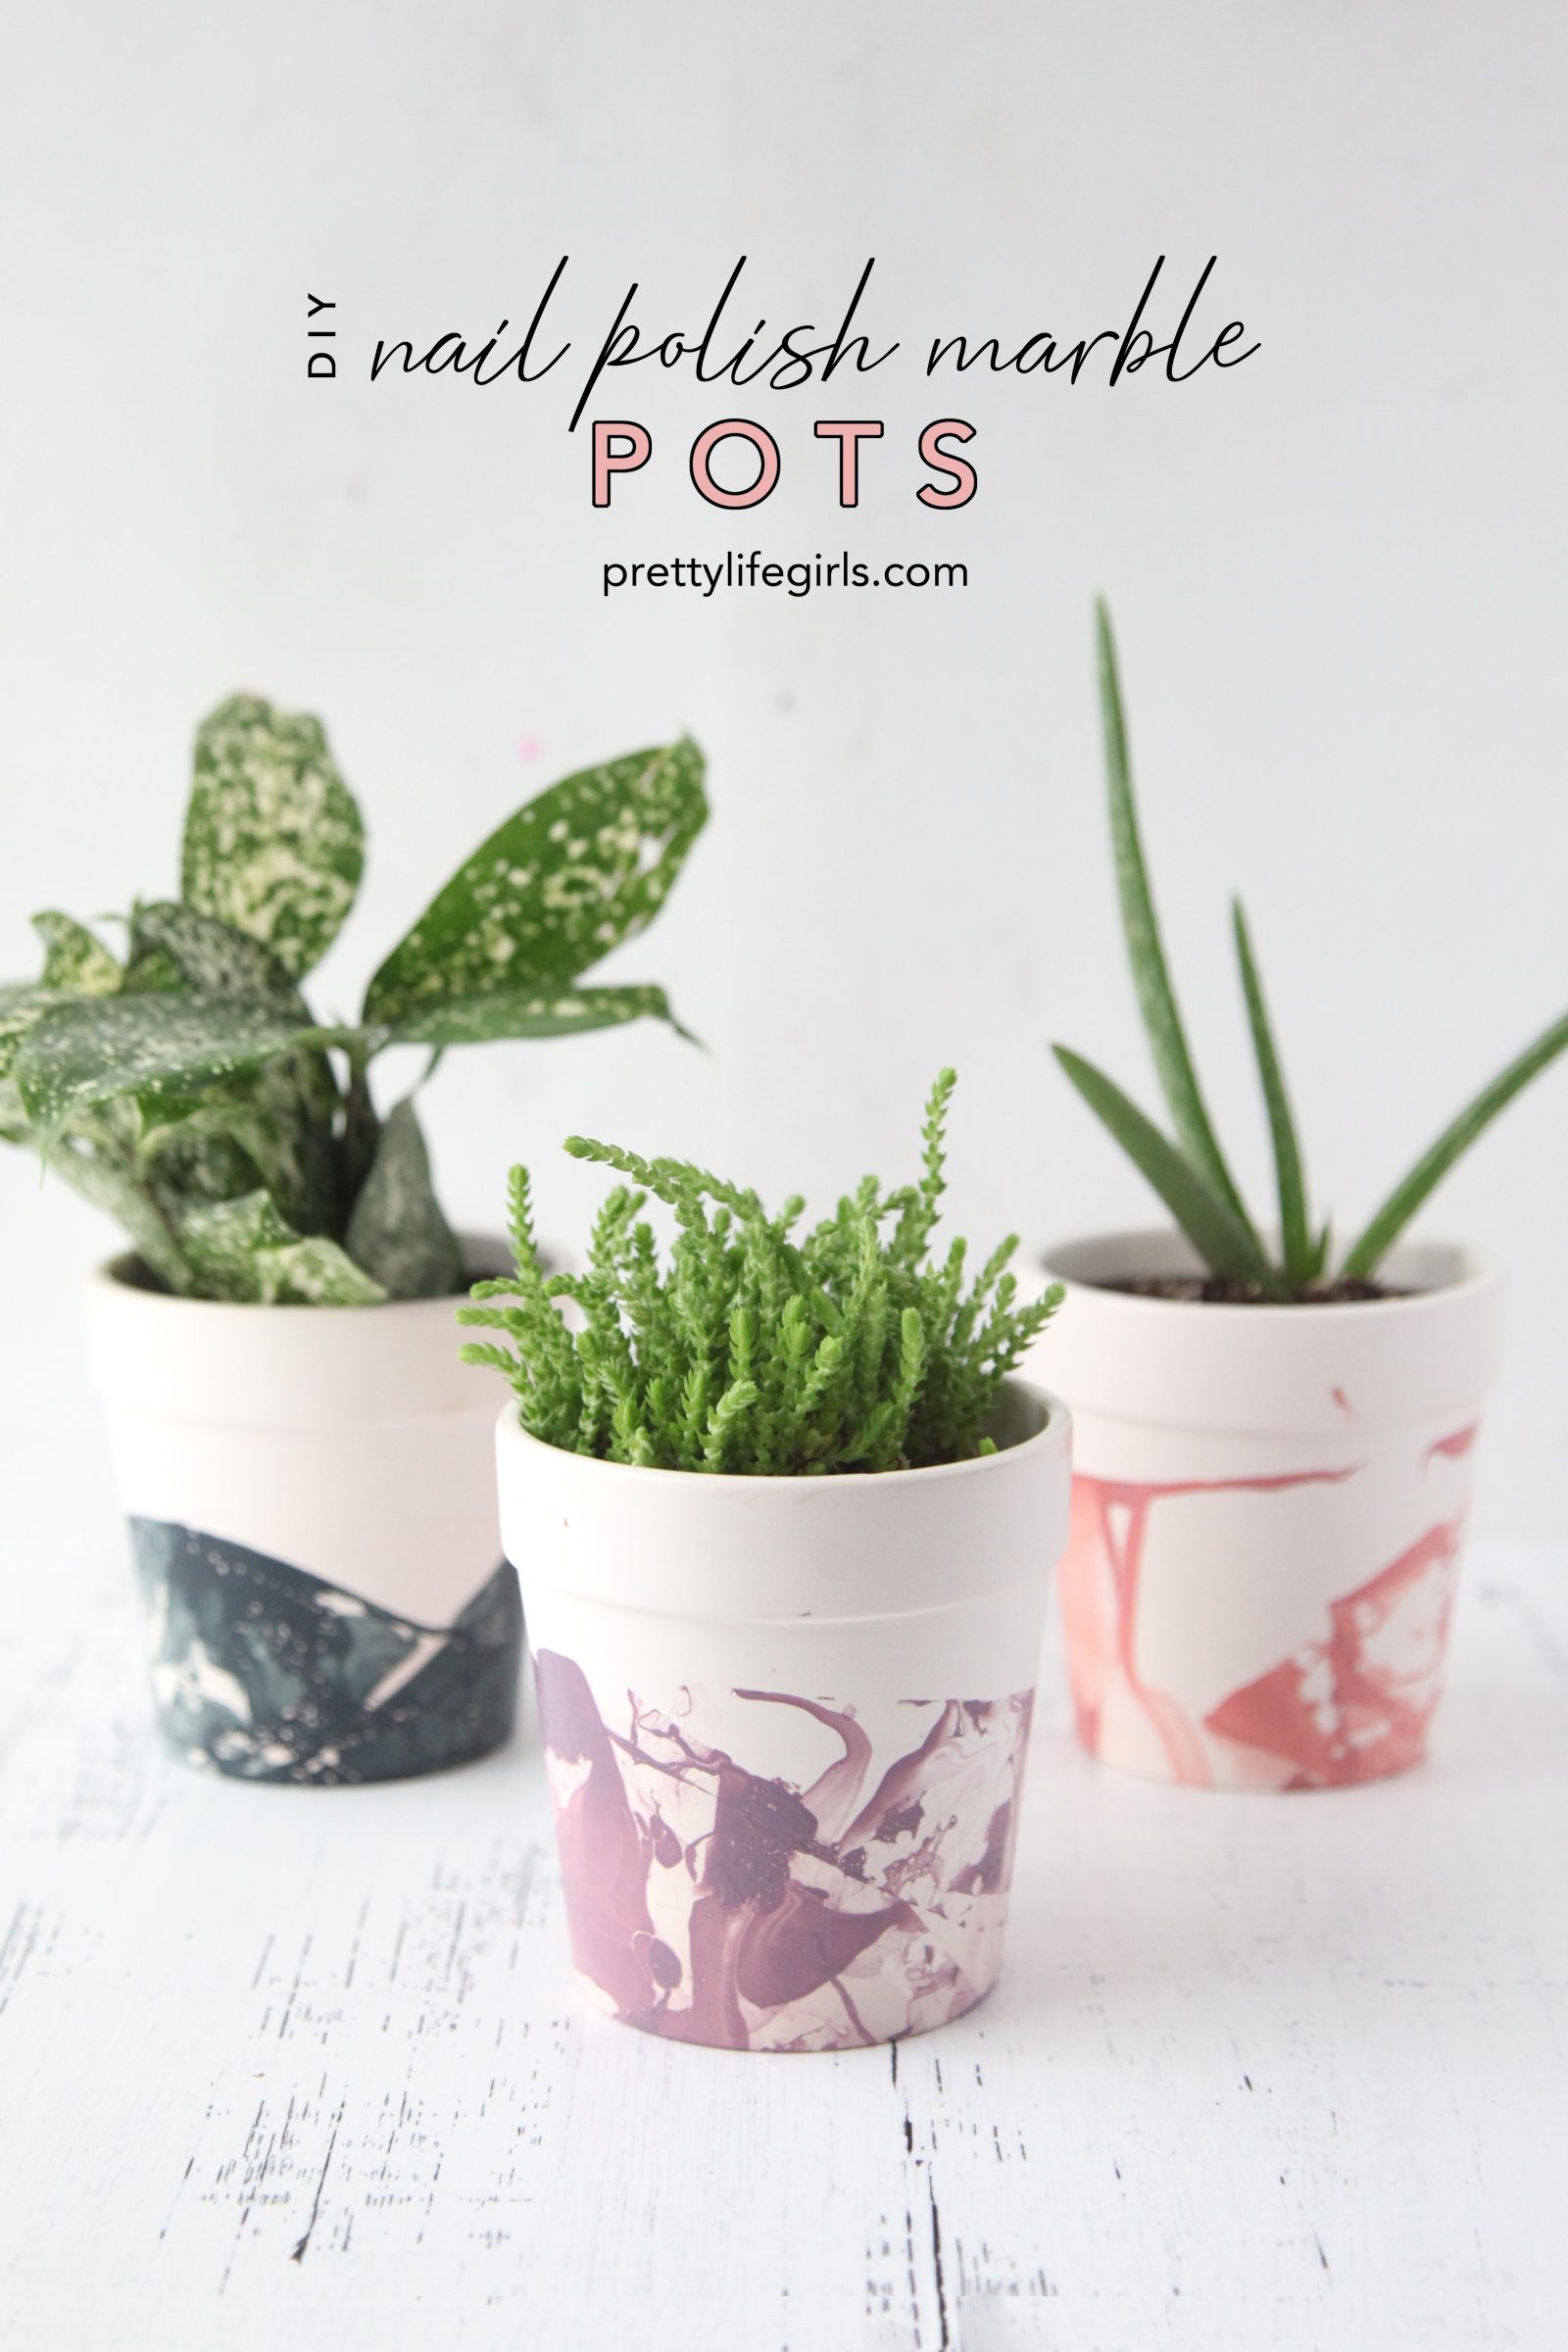 Make It Yourself: DIY Nail Polish Marble Pots + a tutorial featured by Top US Craft Blog + The Pretty Life Girls